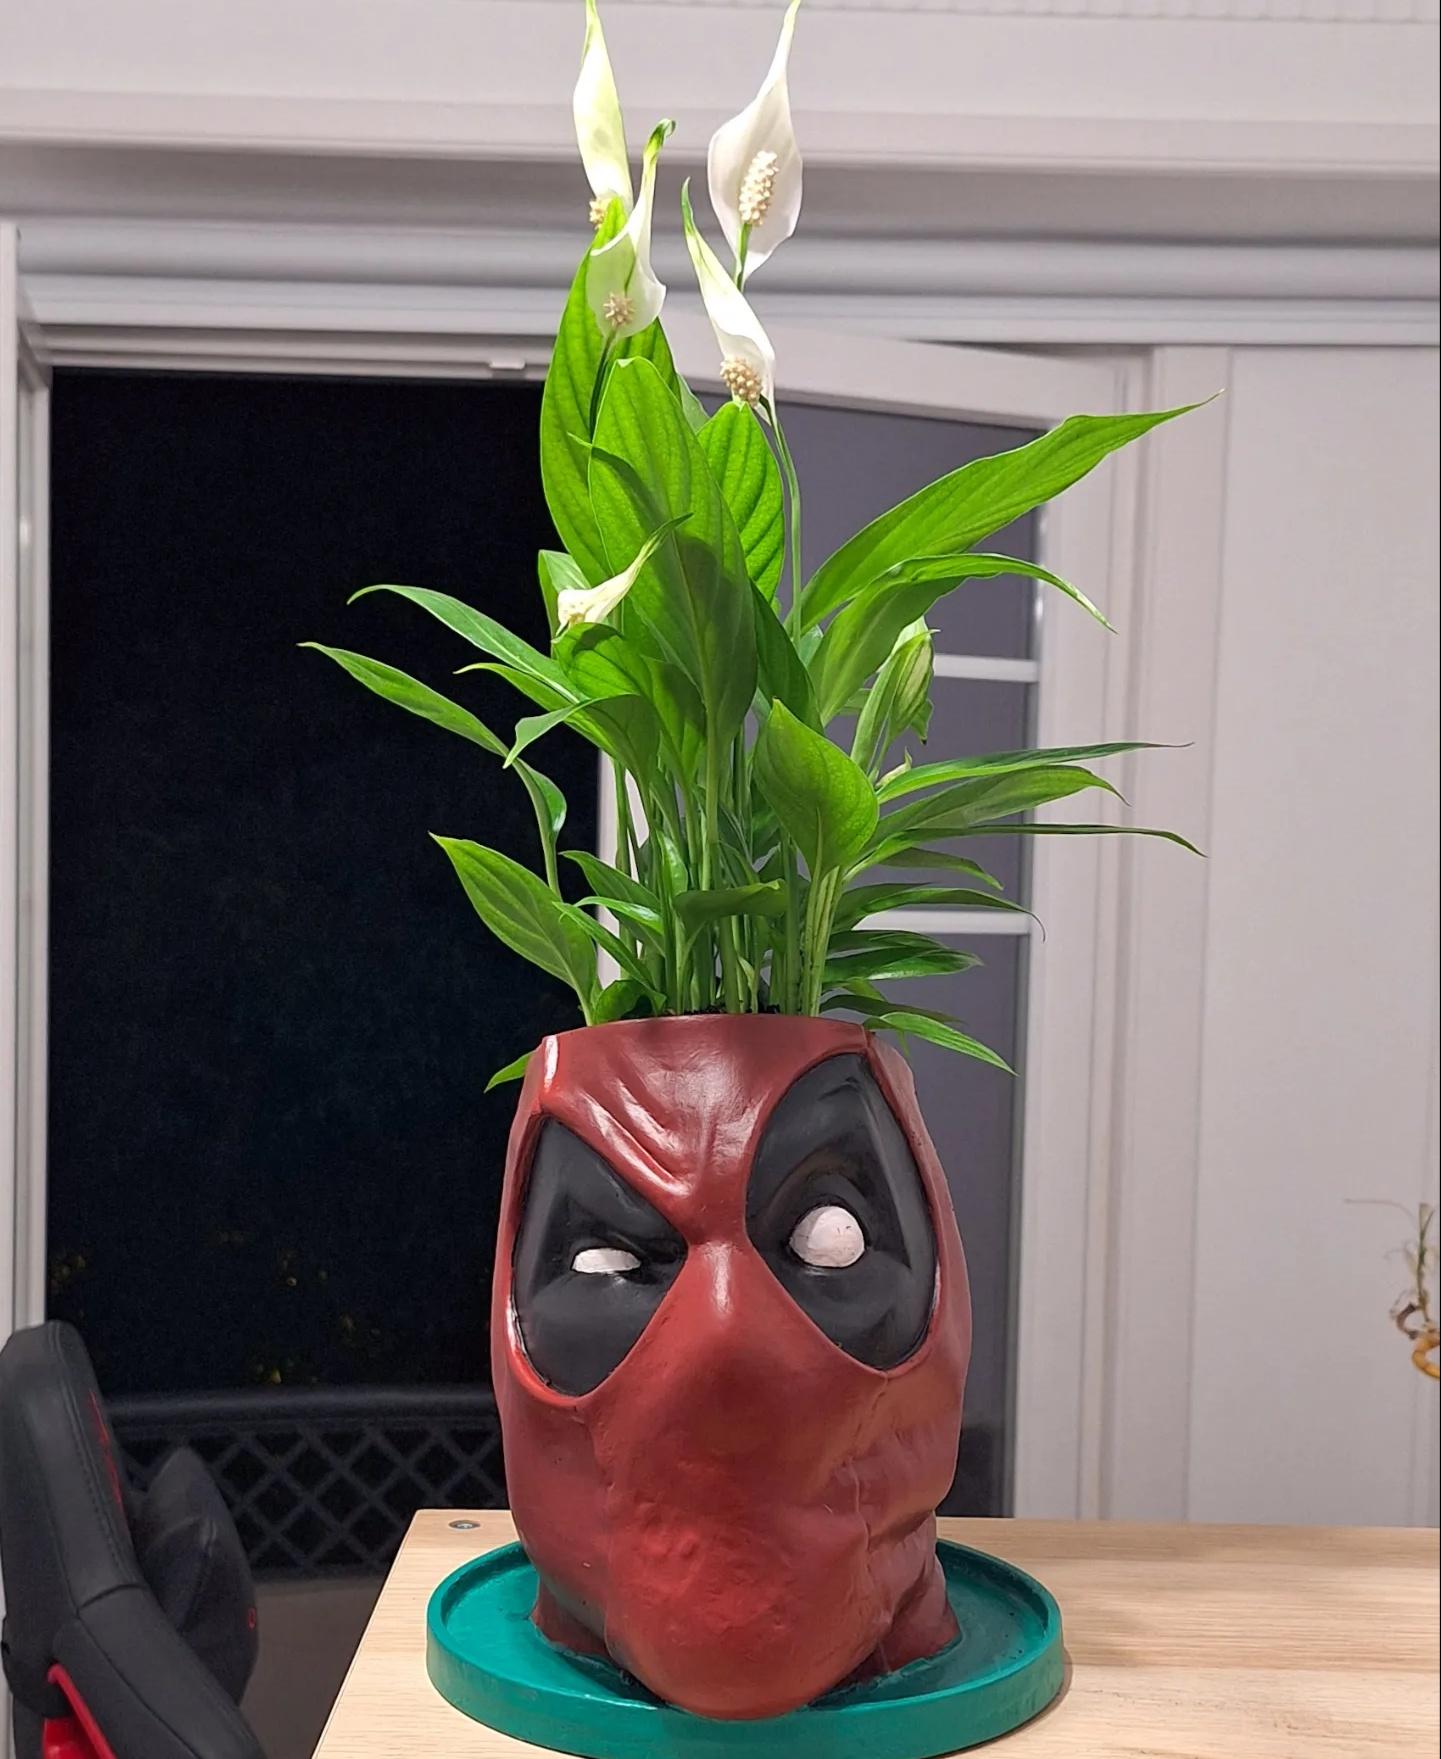 Deadpool Planter  - This was my very first attempt at painting anything so a lot of mistakes were made alone the way.

Still, happy with the end result. - 3d model